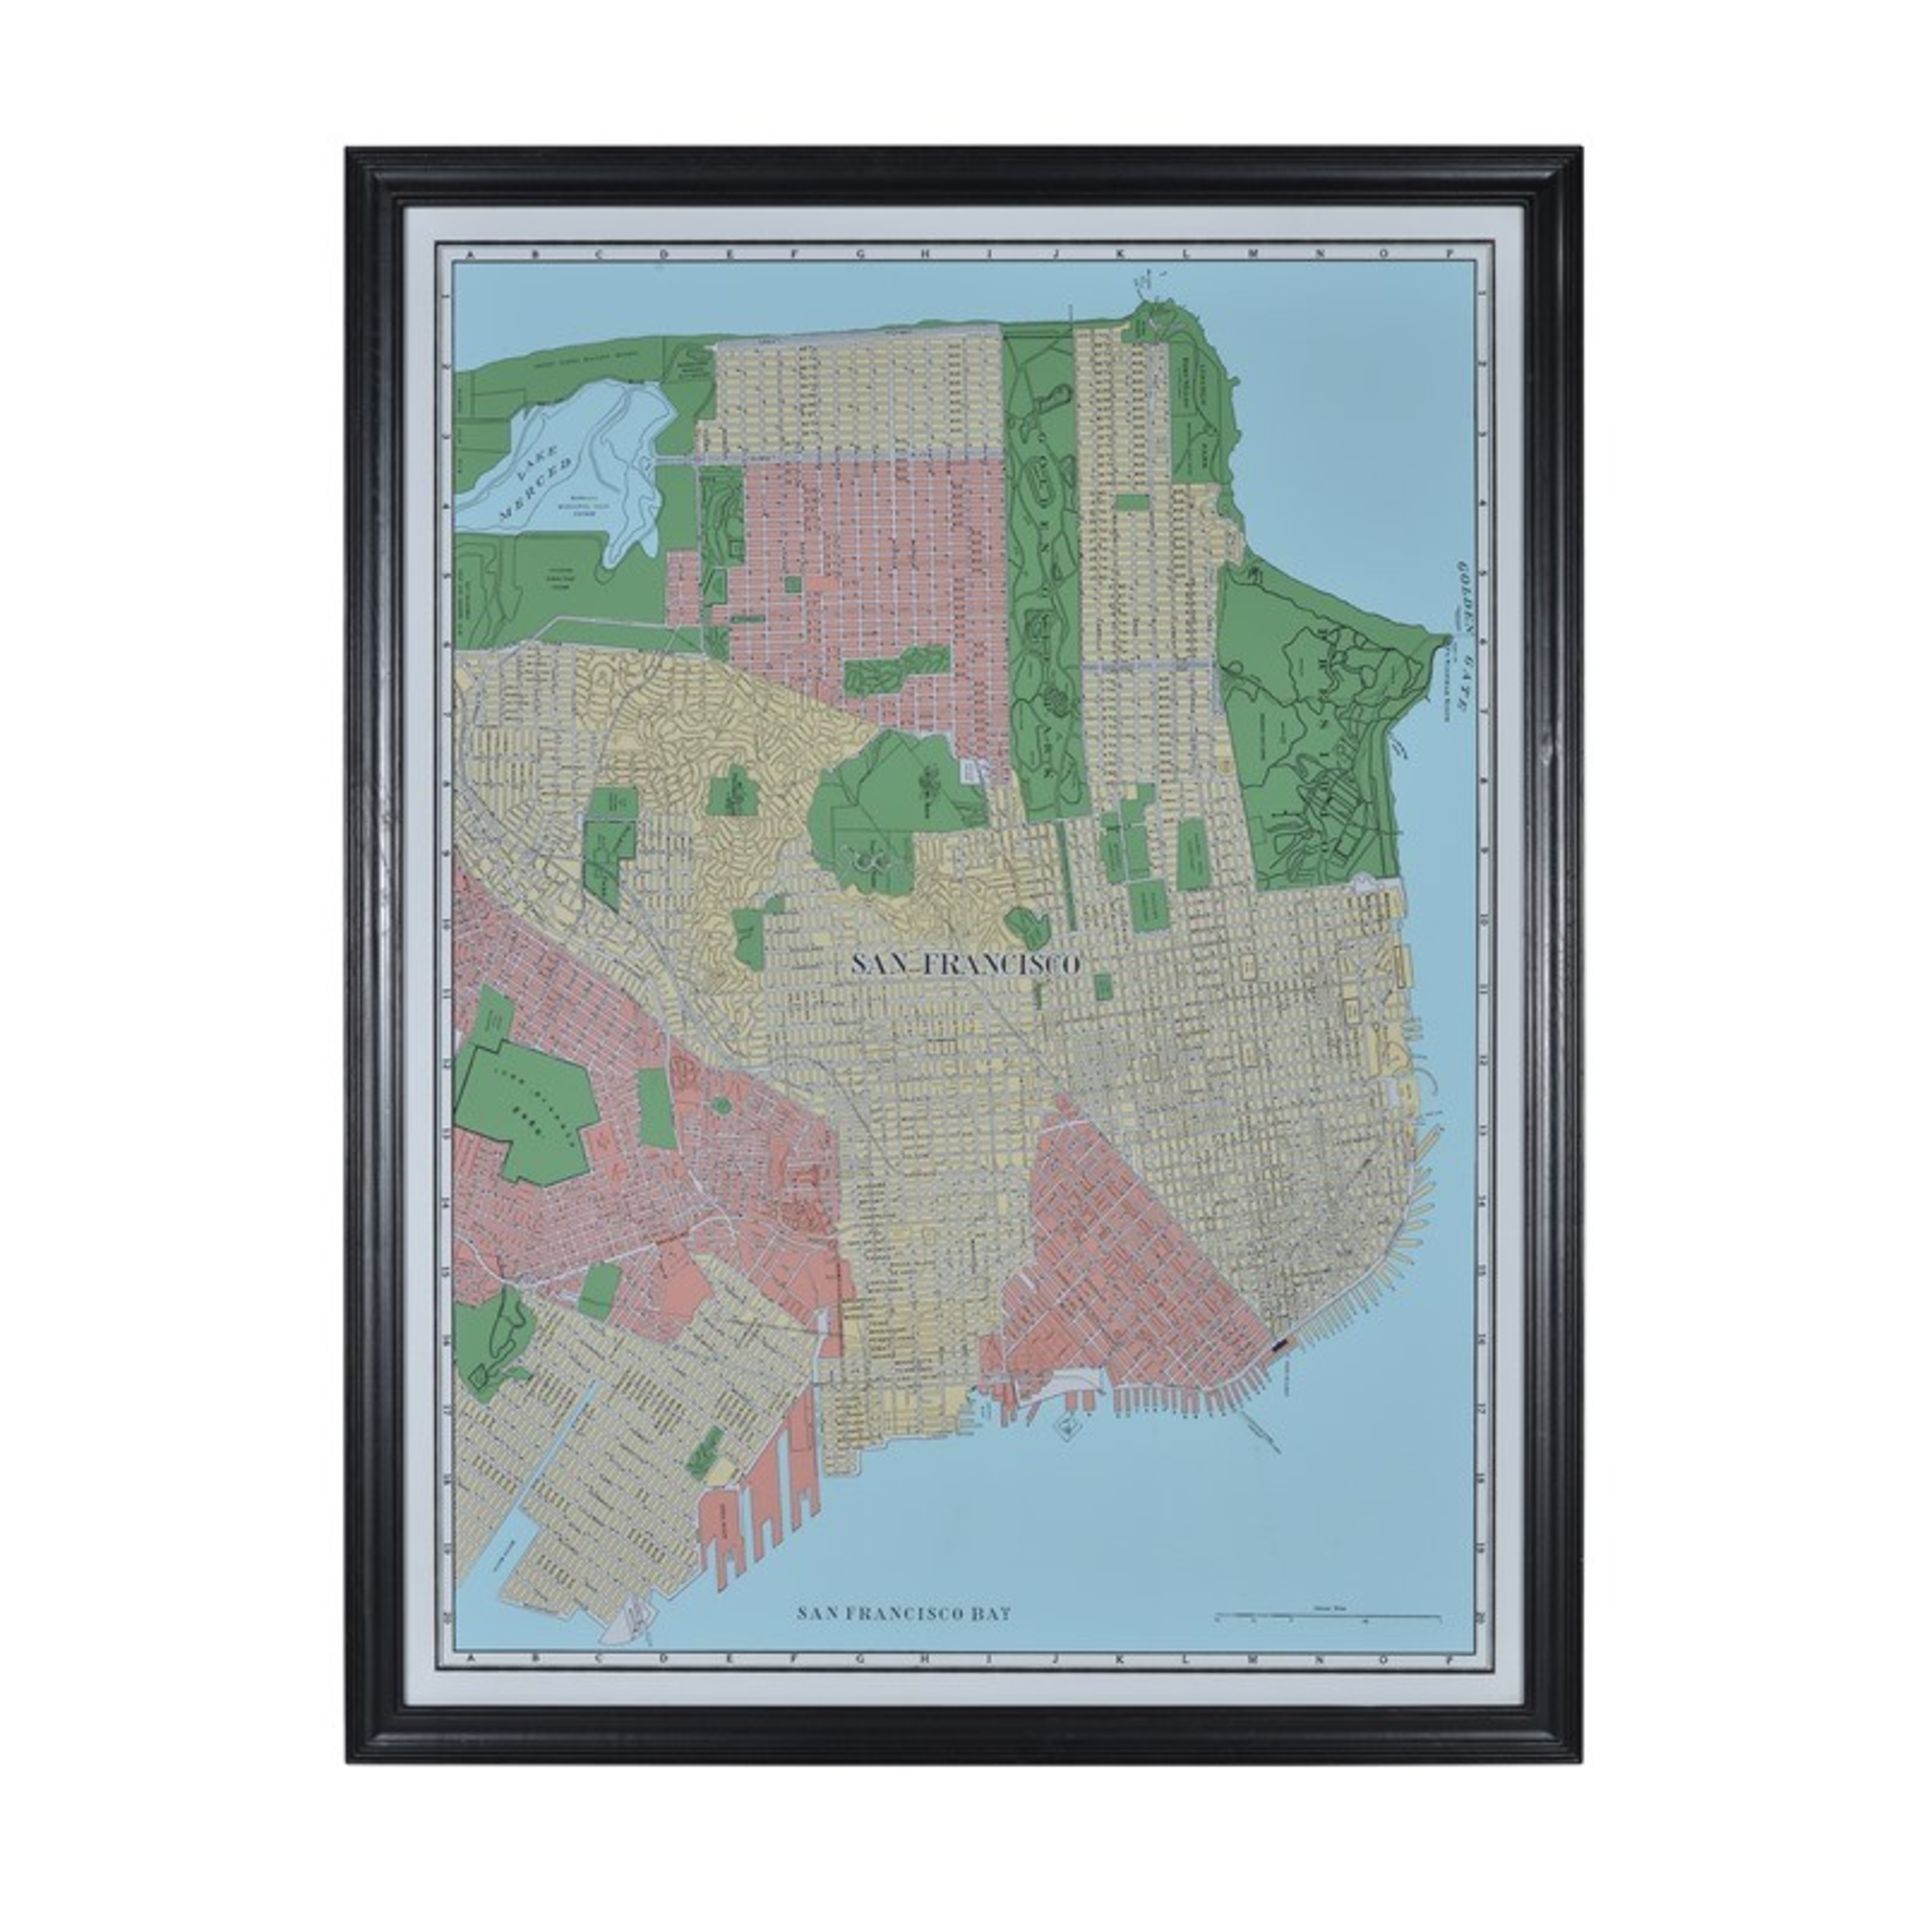 Maps San Francisco These Framed City Maps Pay Homage To Each City’s History And The Life Stories - Image 2 of 2